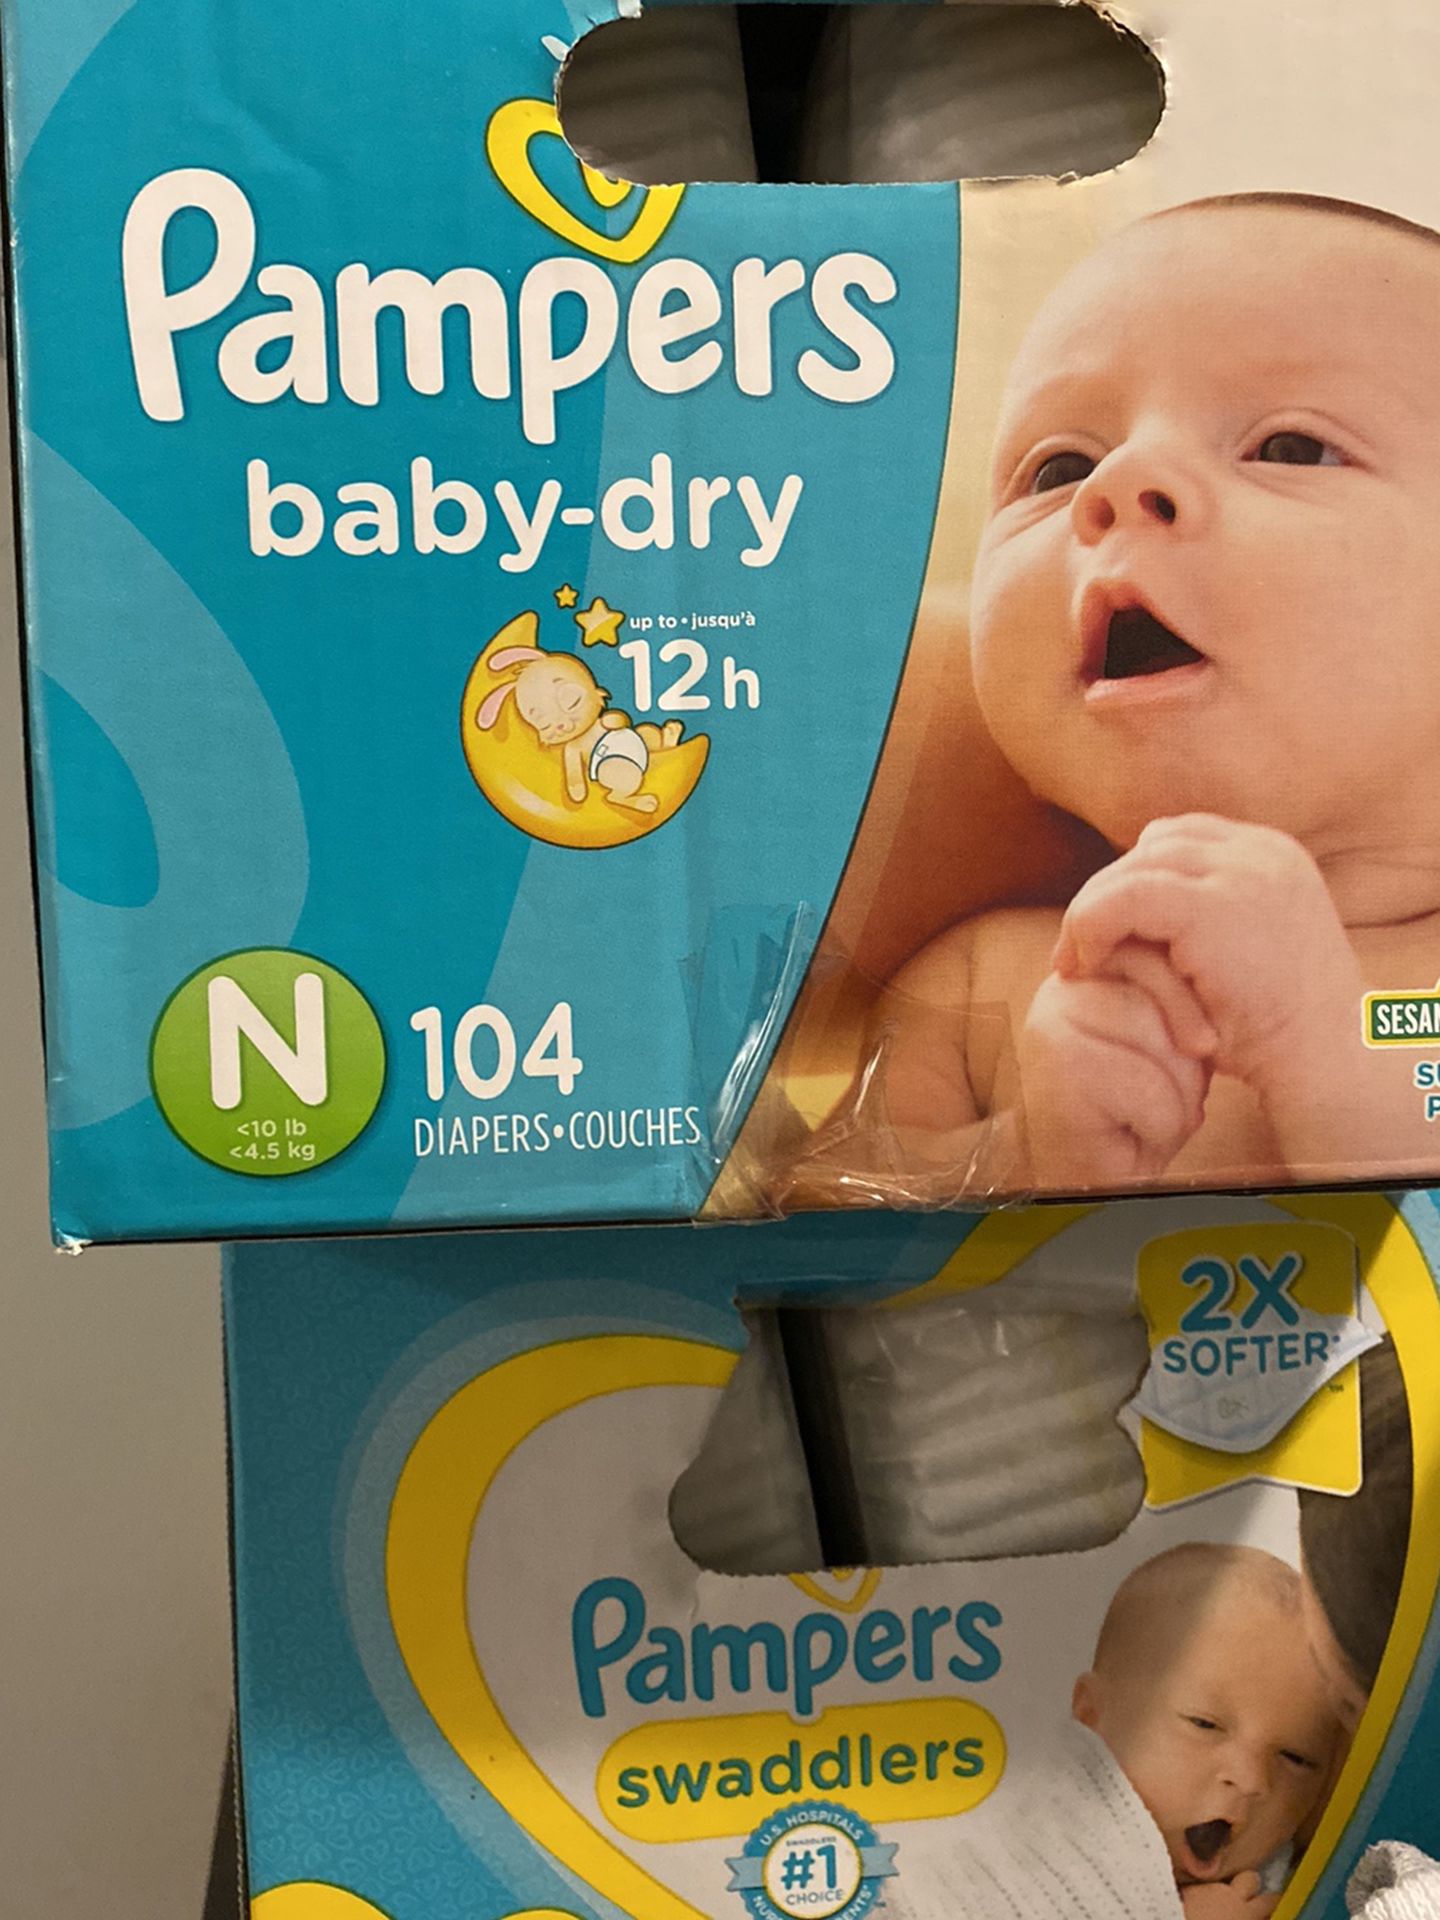 Pampers Baby Dry And Pampers Swaddler Newborn Diapers 104 And 84 Count